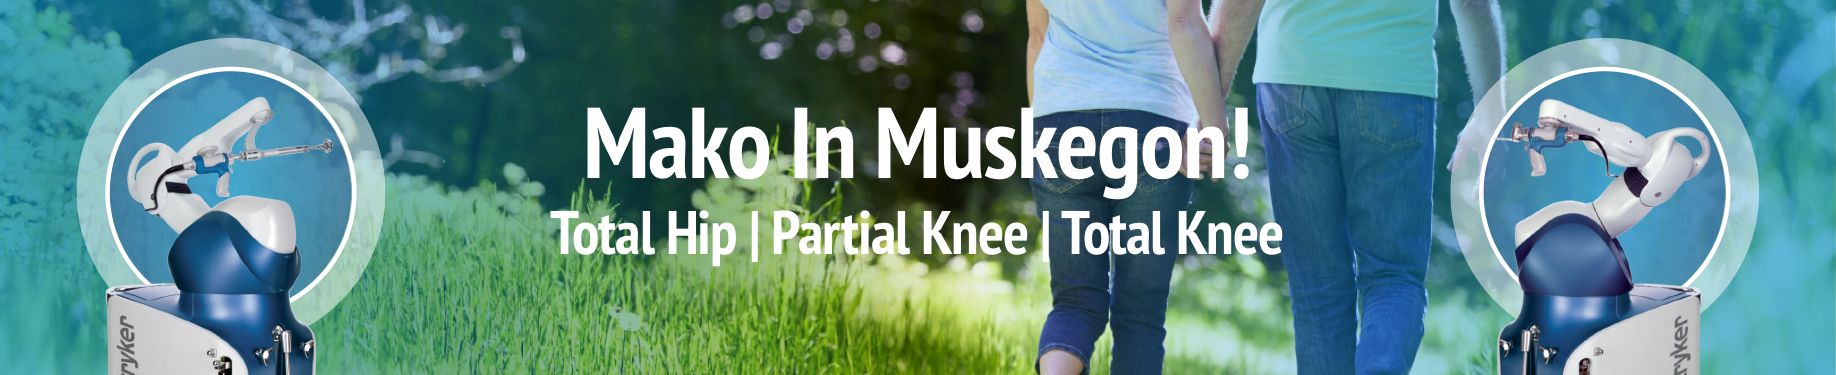 Orthopaedic Associates of Muskegon now offers joint replacement using the Mako Robotic-Arm Assisted Surgery System. Call Us Today!